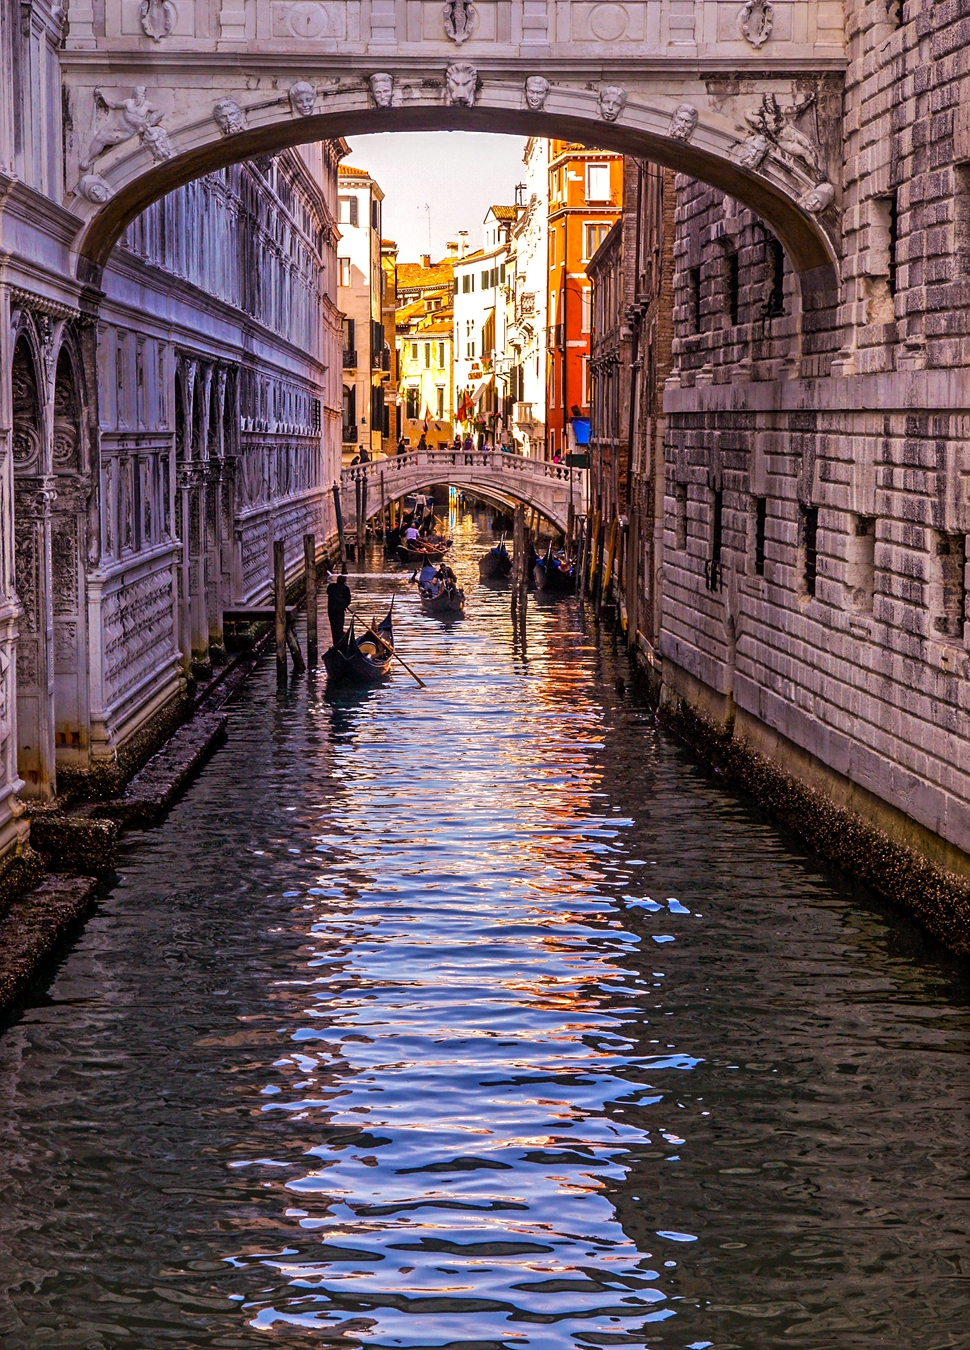 World tour around the world - the water city of Venice